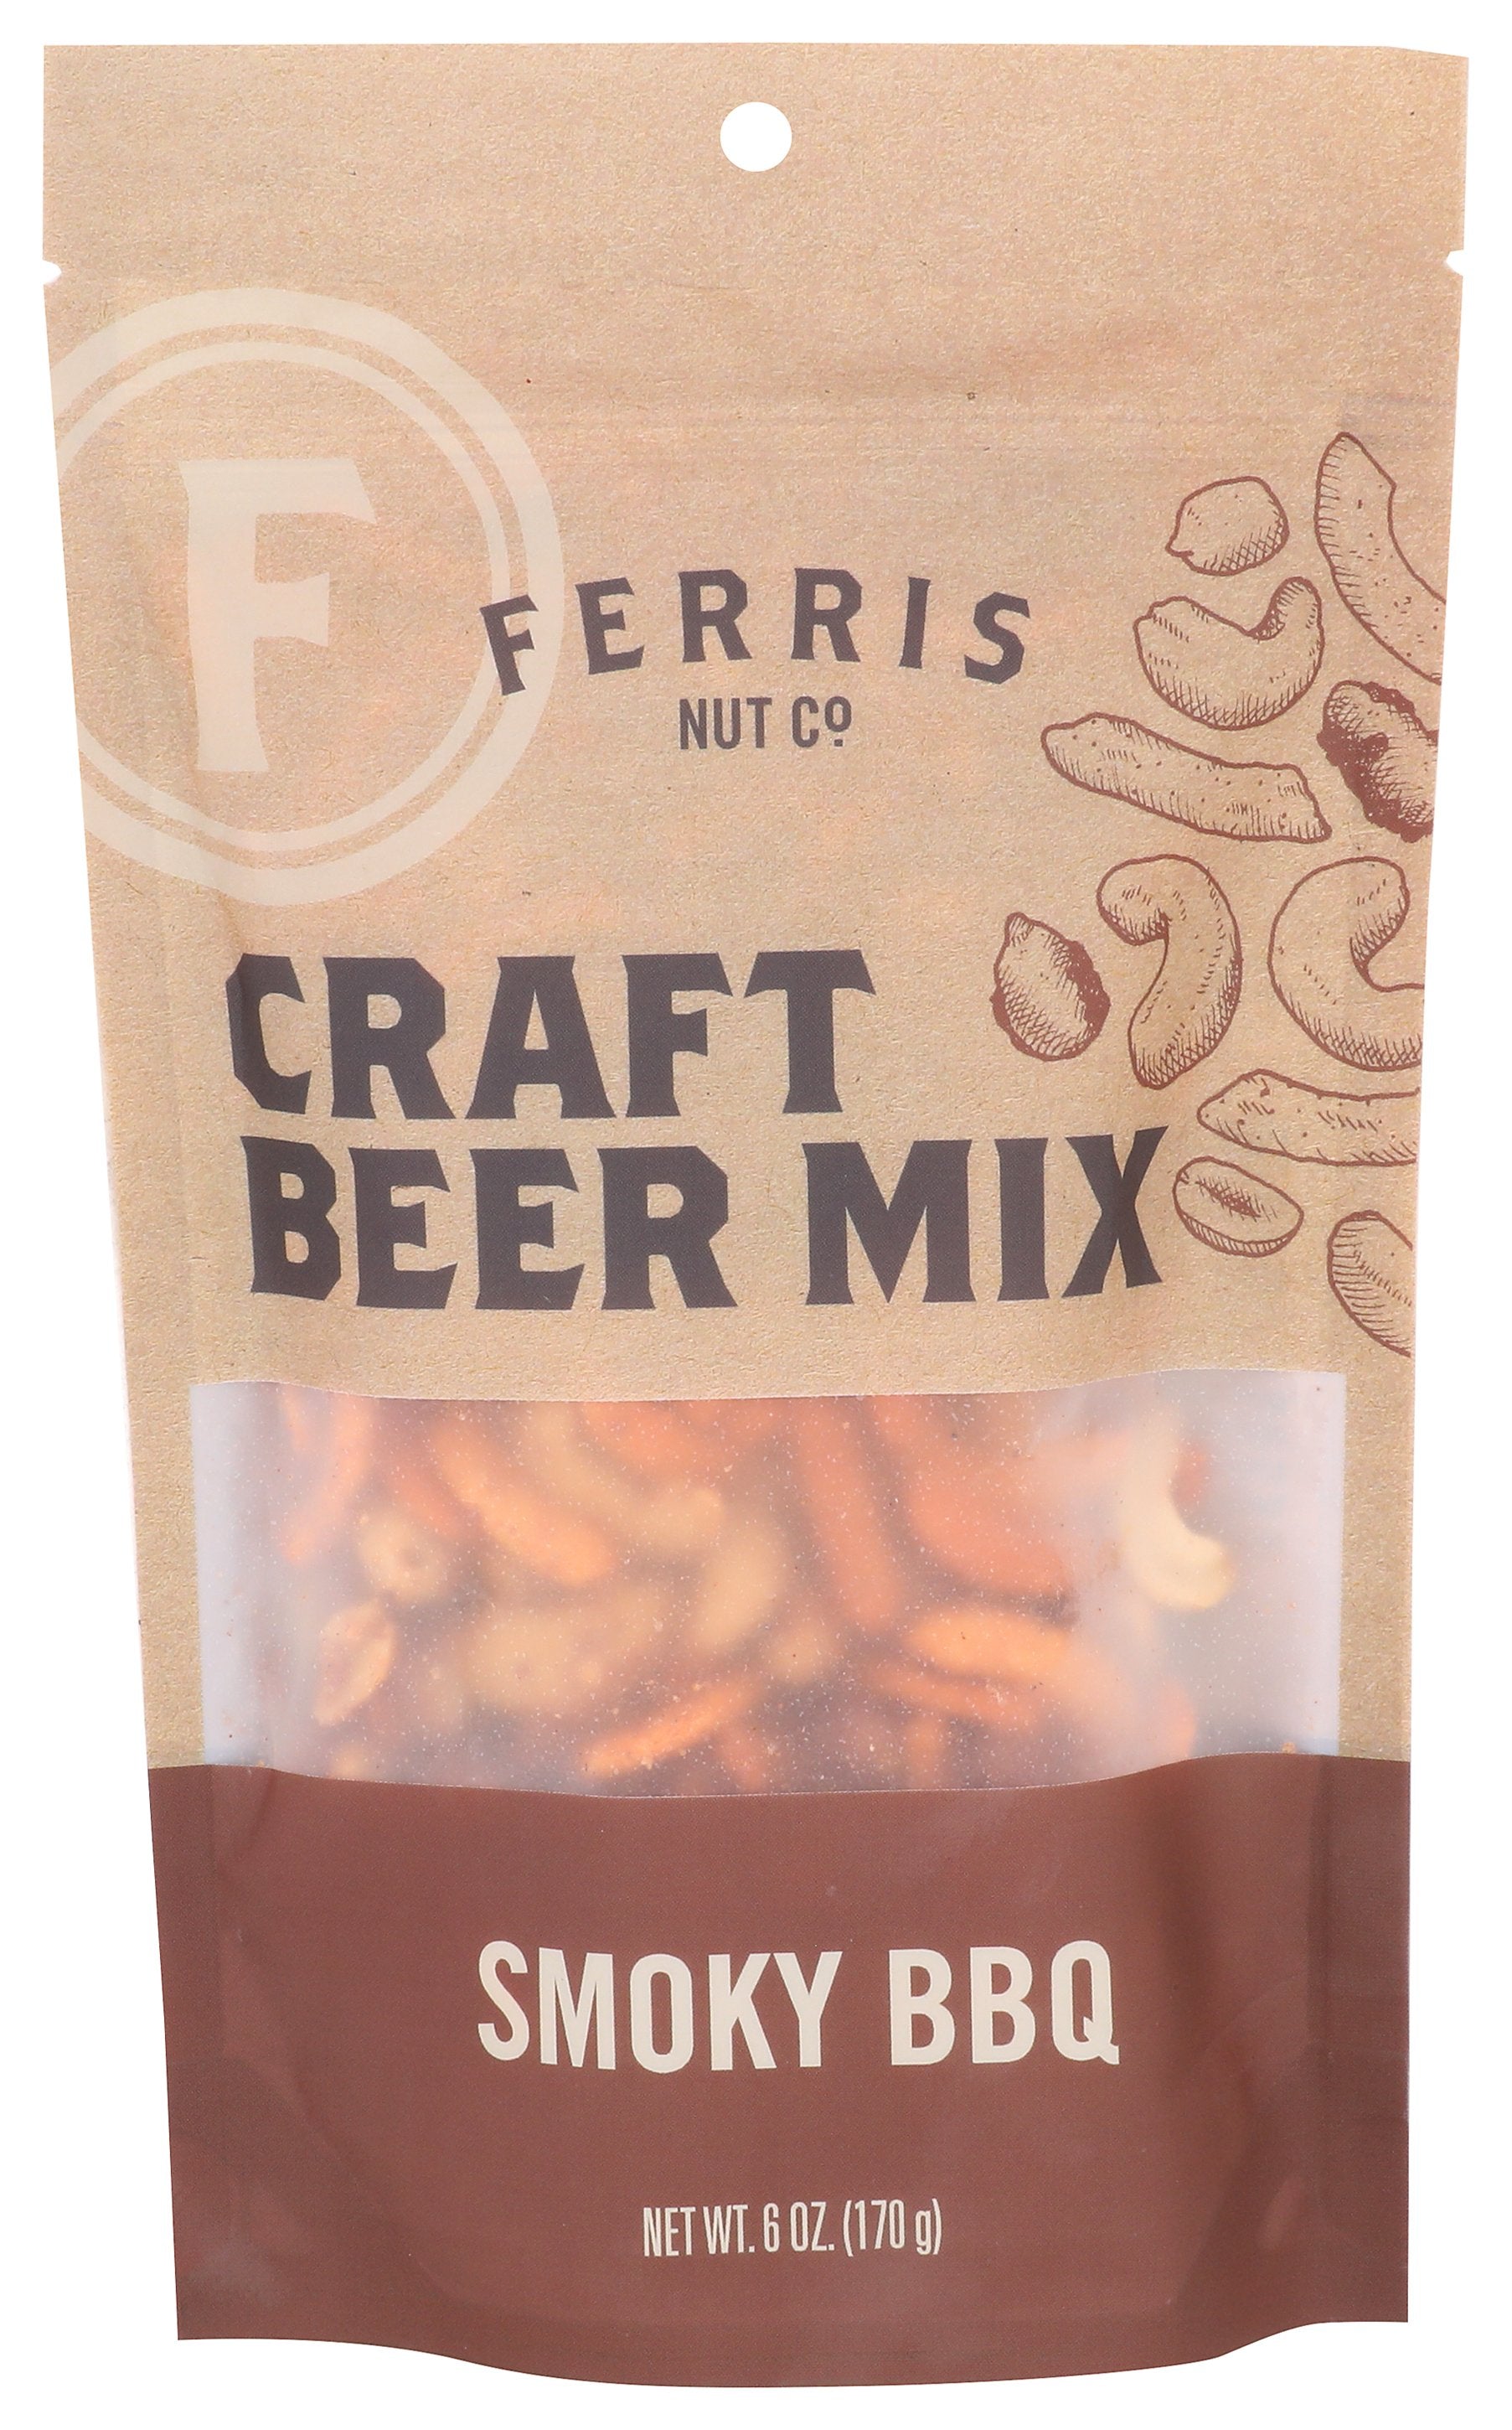 FERRIS EB TRAIL BBQ CRAFT BEER MIX - Case of 12